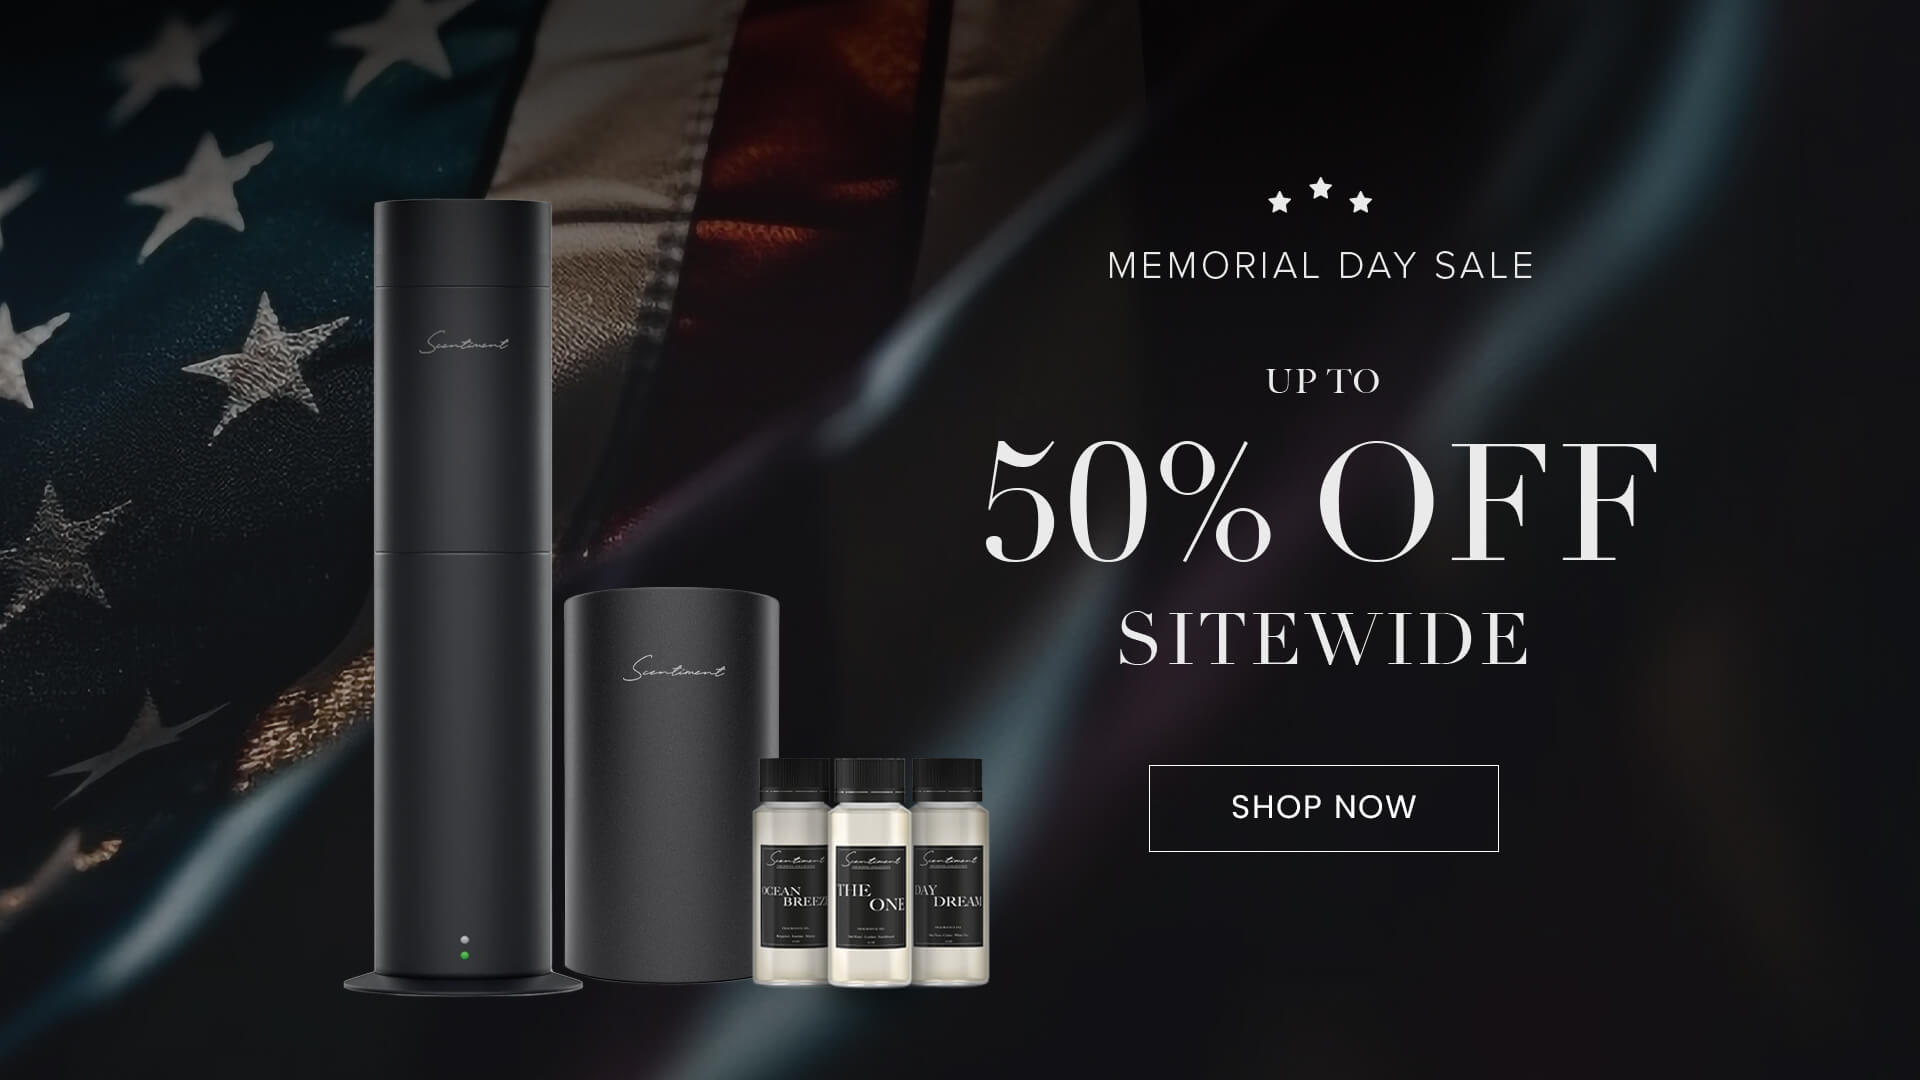 Memorial Day Sale: Up to 50% OFF Sitewide! Click here to Shop Now!